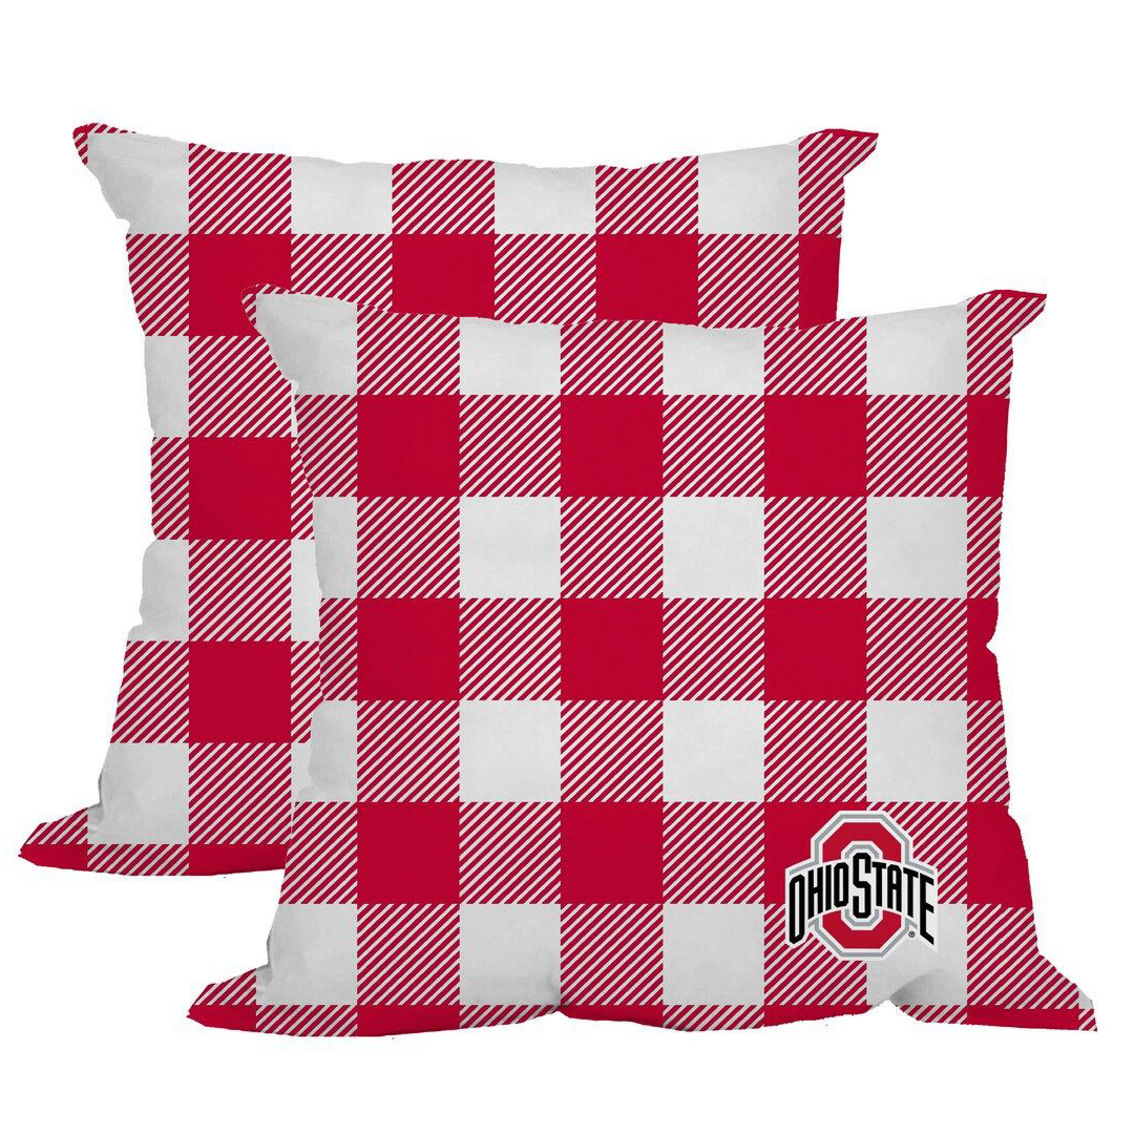 Logo Brands Ohio State Buckeyes 2-Pack Buffalo Check Plaid Outdoor Pillow Set - Image 2 of 2